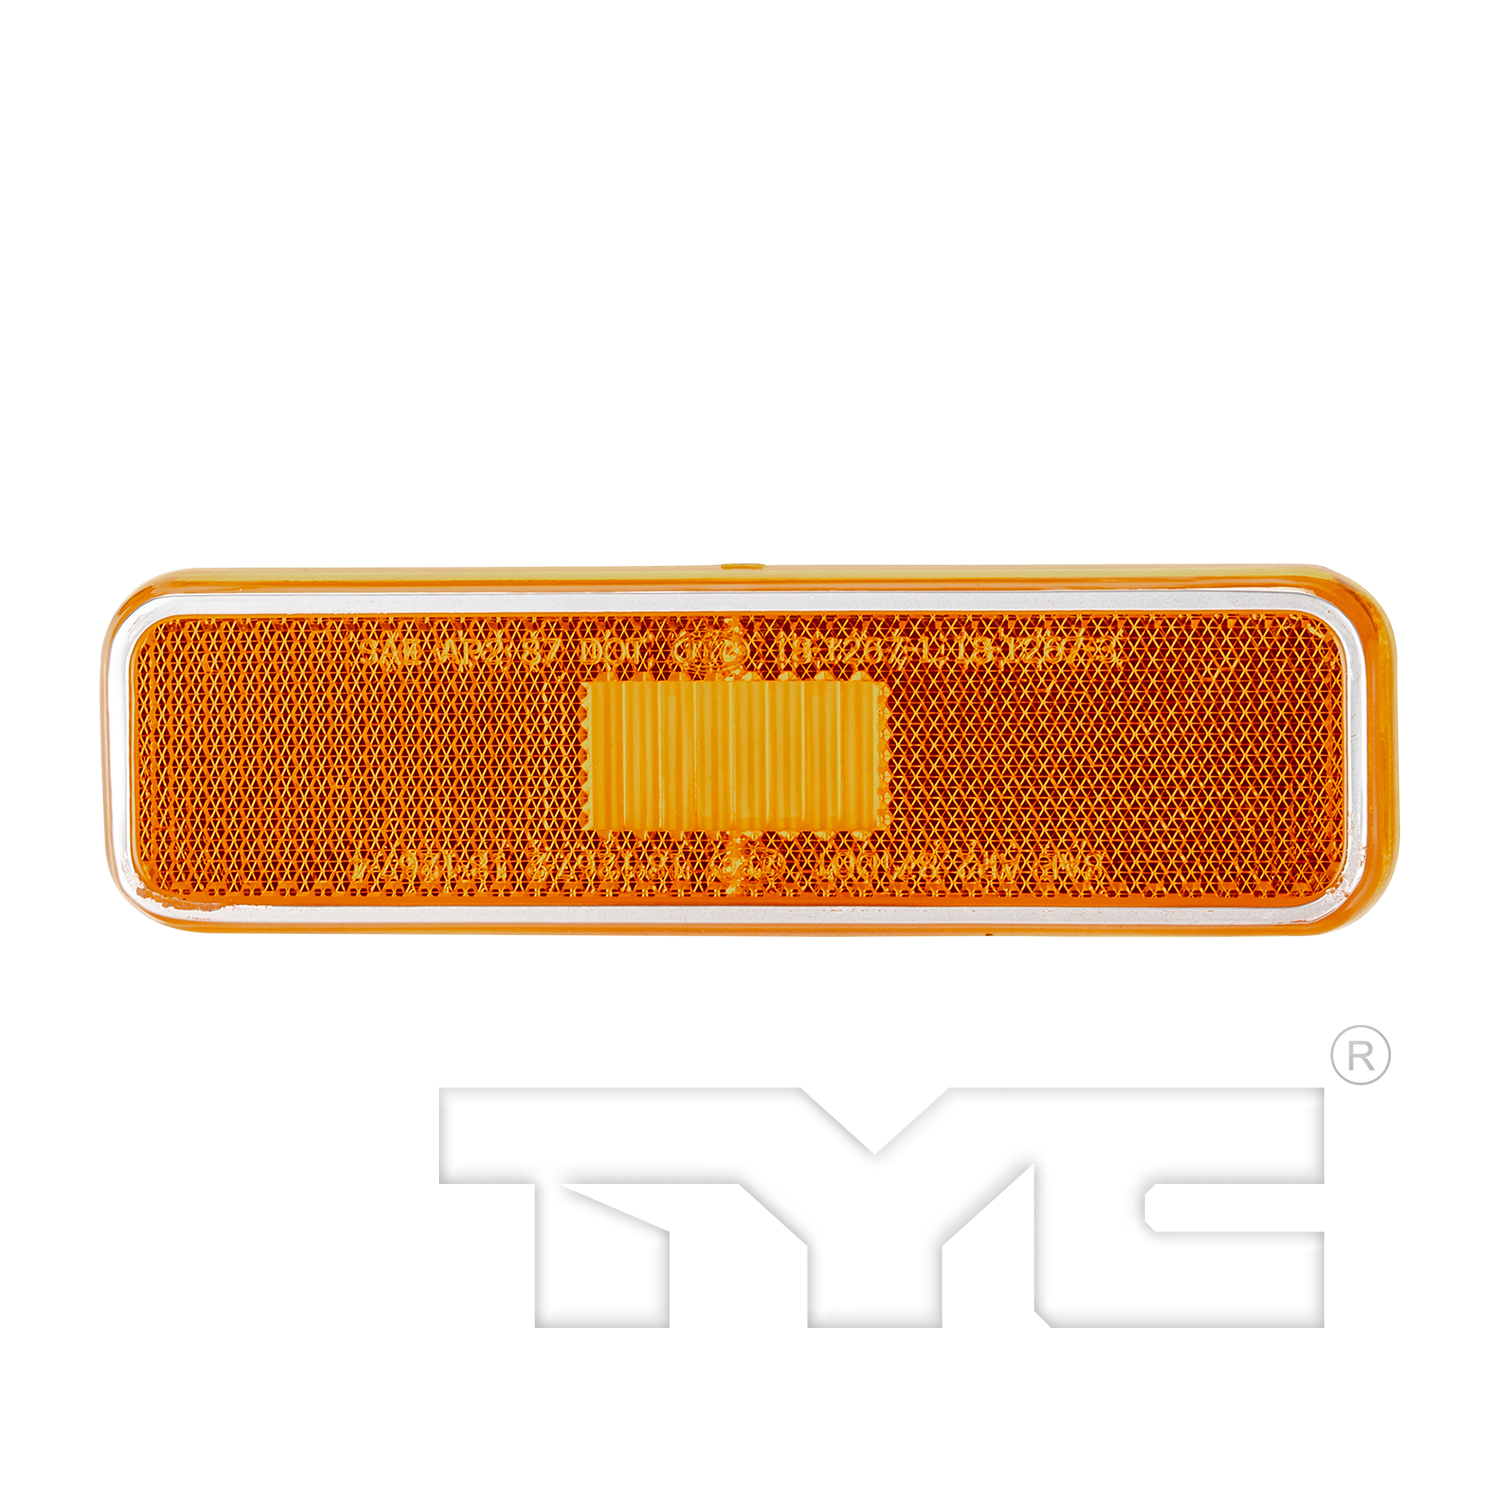 Aftermarket LAMPS for PLYMOUTH - TRAILDUSTER, TRAILDUSTER,81-81,RT Front marker lamp assy